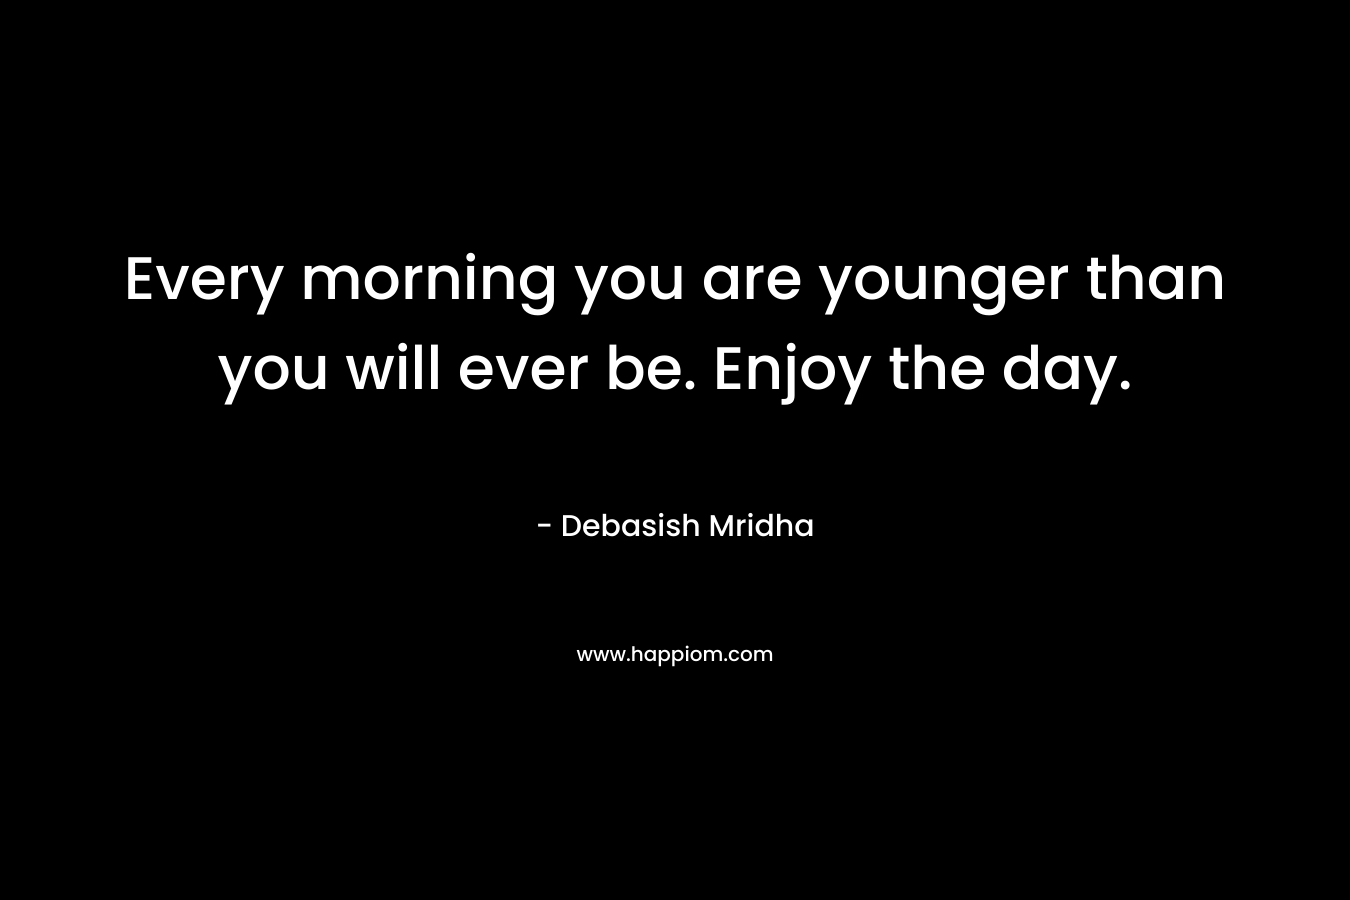 Every morning you are younger than you will ever be. Enjoy the day.